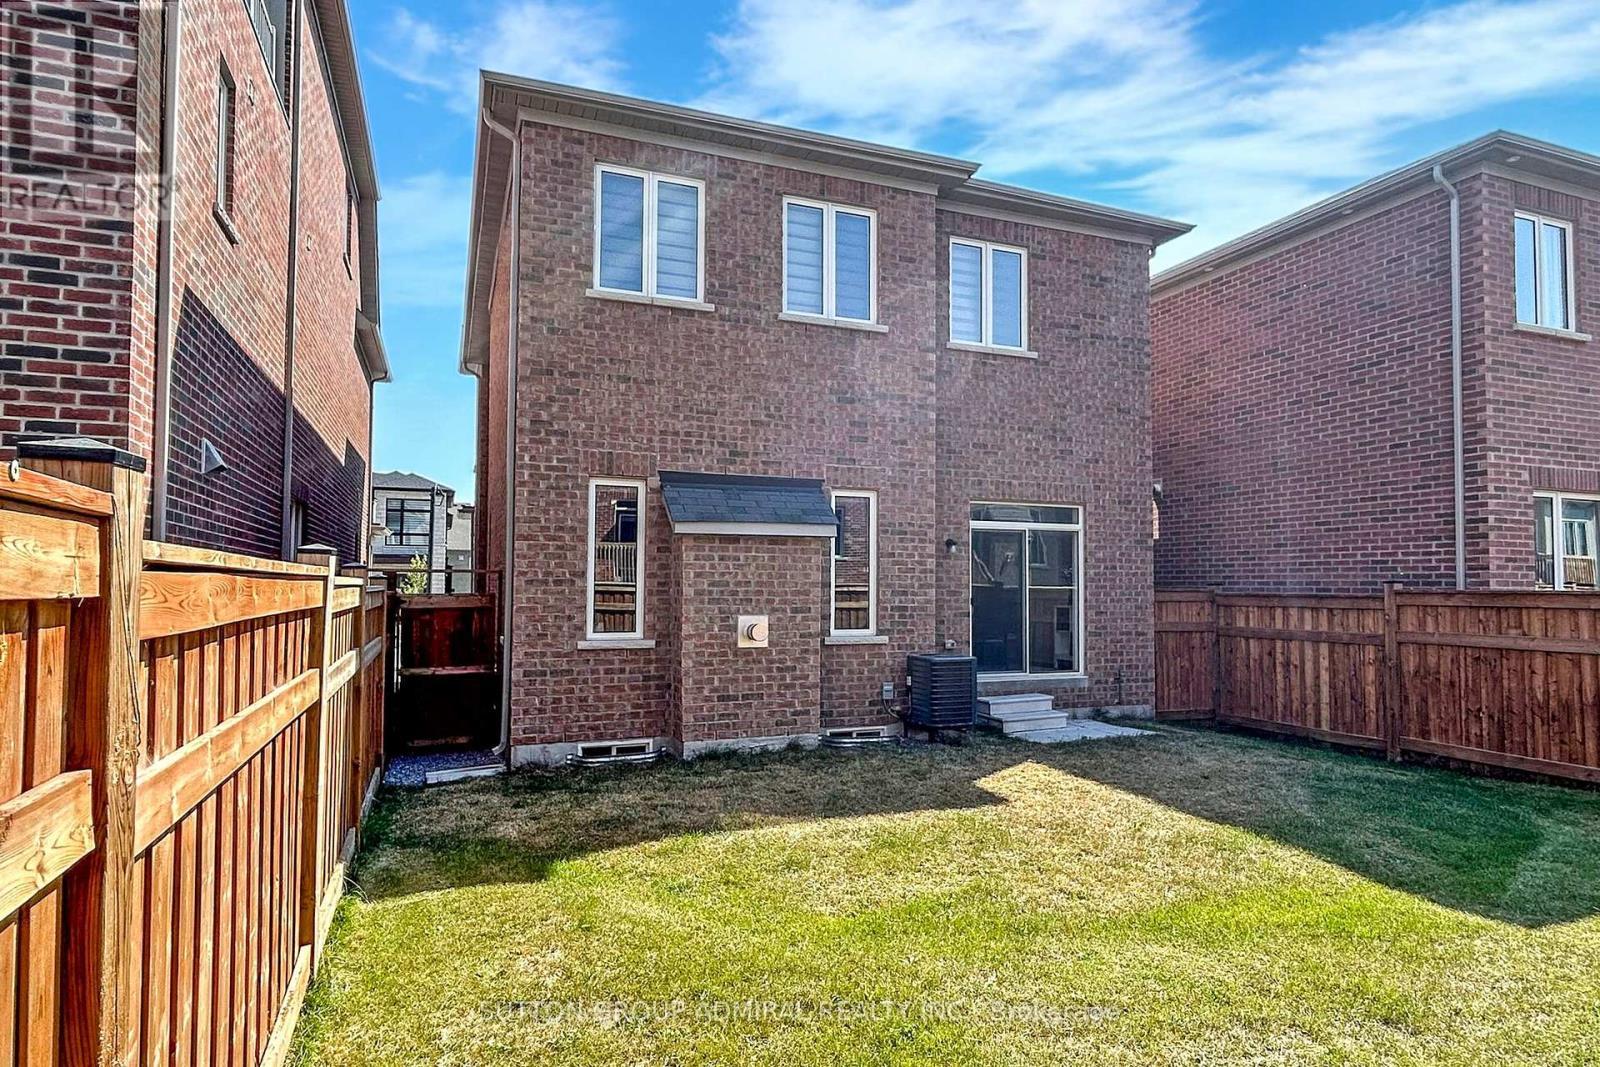 












32 RED GIANT ST

,
Richmond Hill,




Ontario
L4C4Y4

